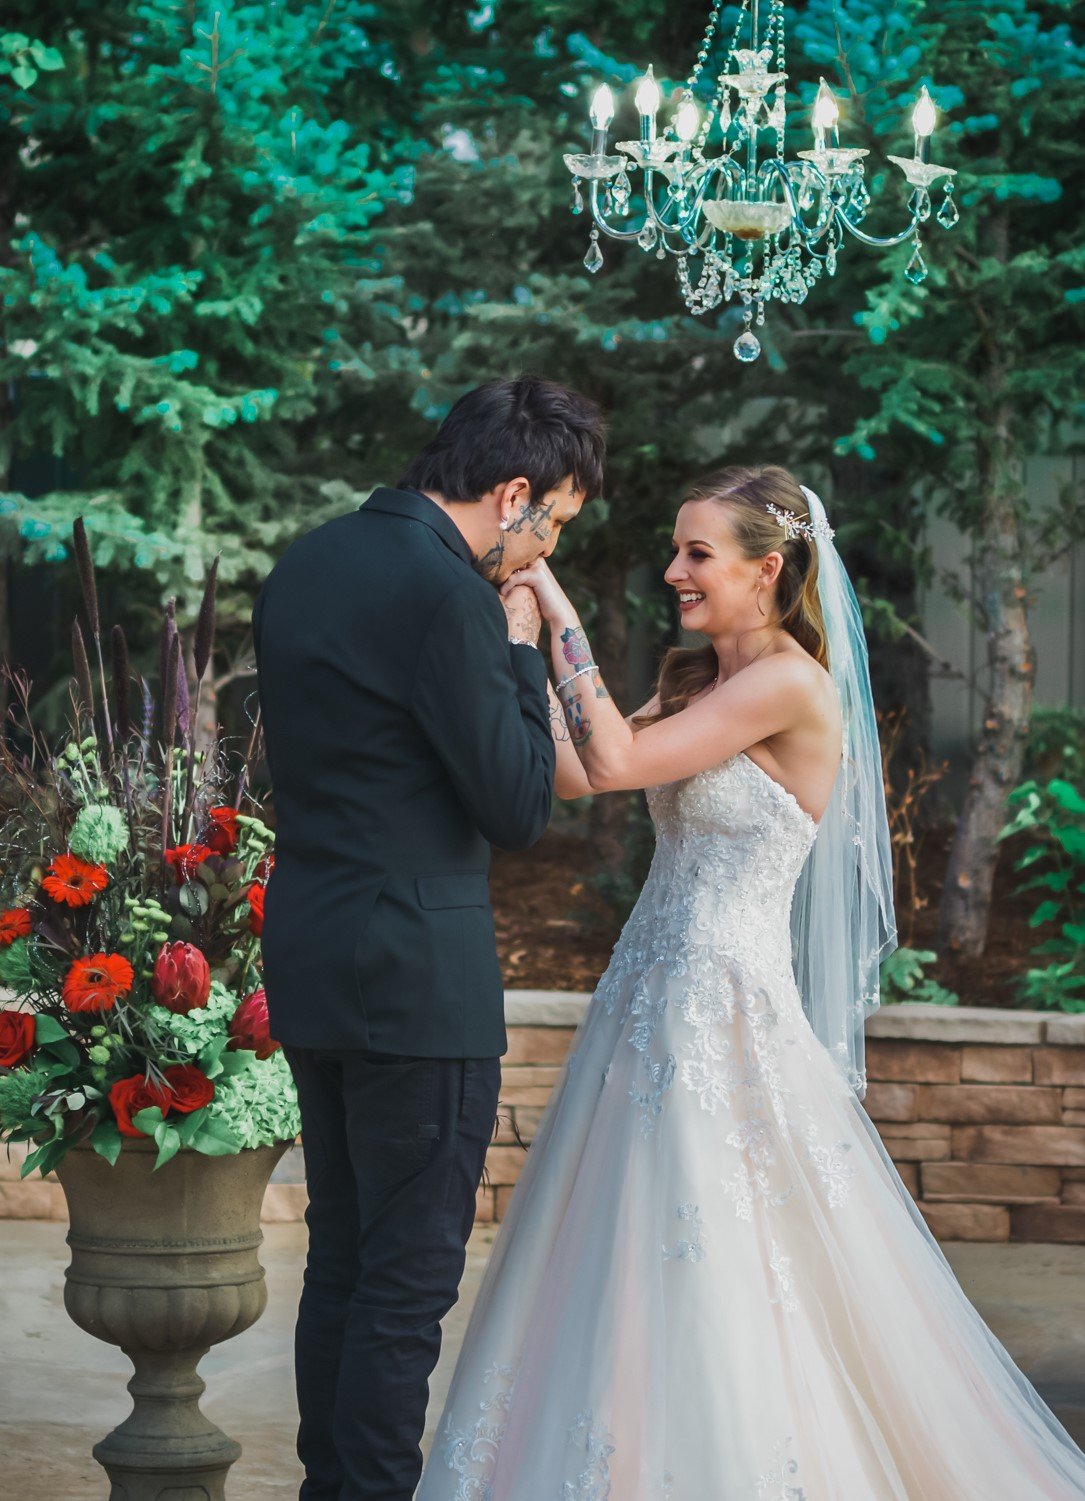 An intimate moment - Ken Caryl Vista by Wedgewood Weddings